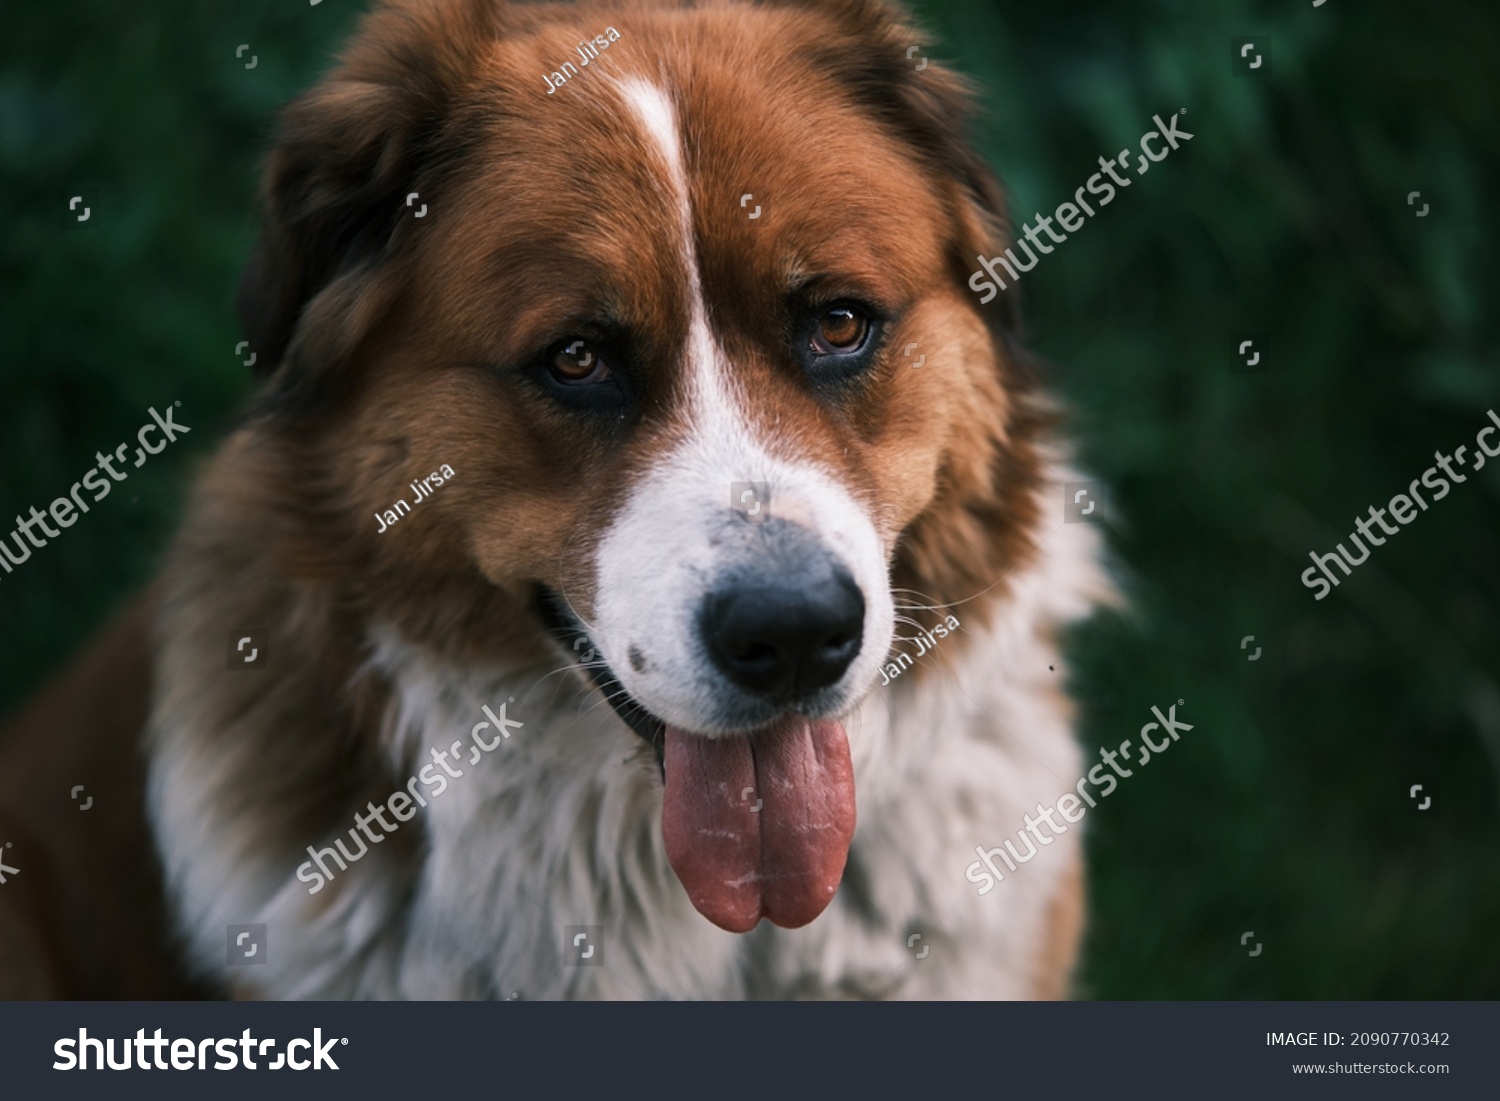 A portrait of happy dog with its tongue out. Moscow Watchdog sitting in the garden with blurred greeen background.  #2090770342